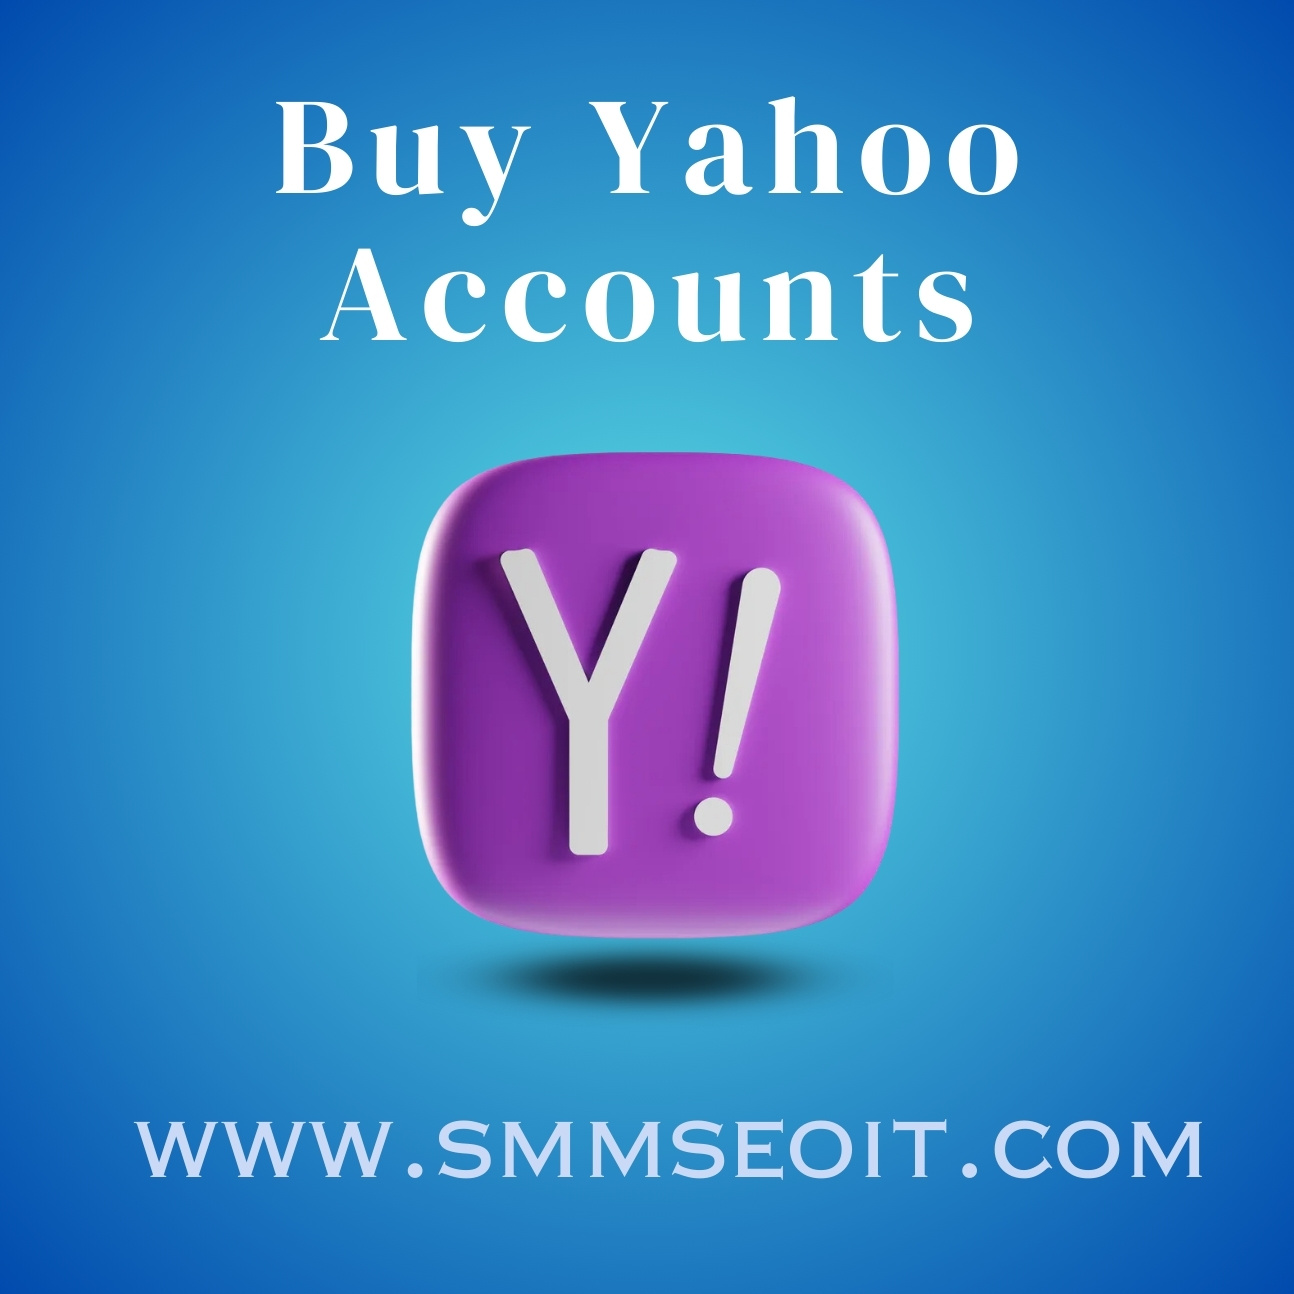 Buy Yahoo Accounts - Verified, Secure, and Reliable